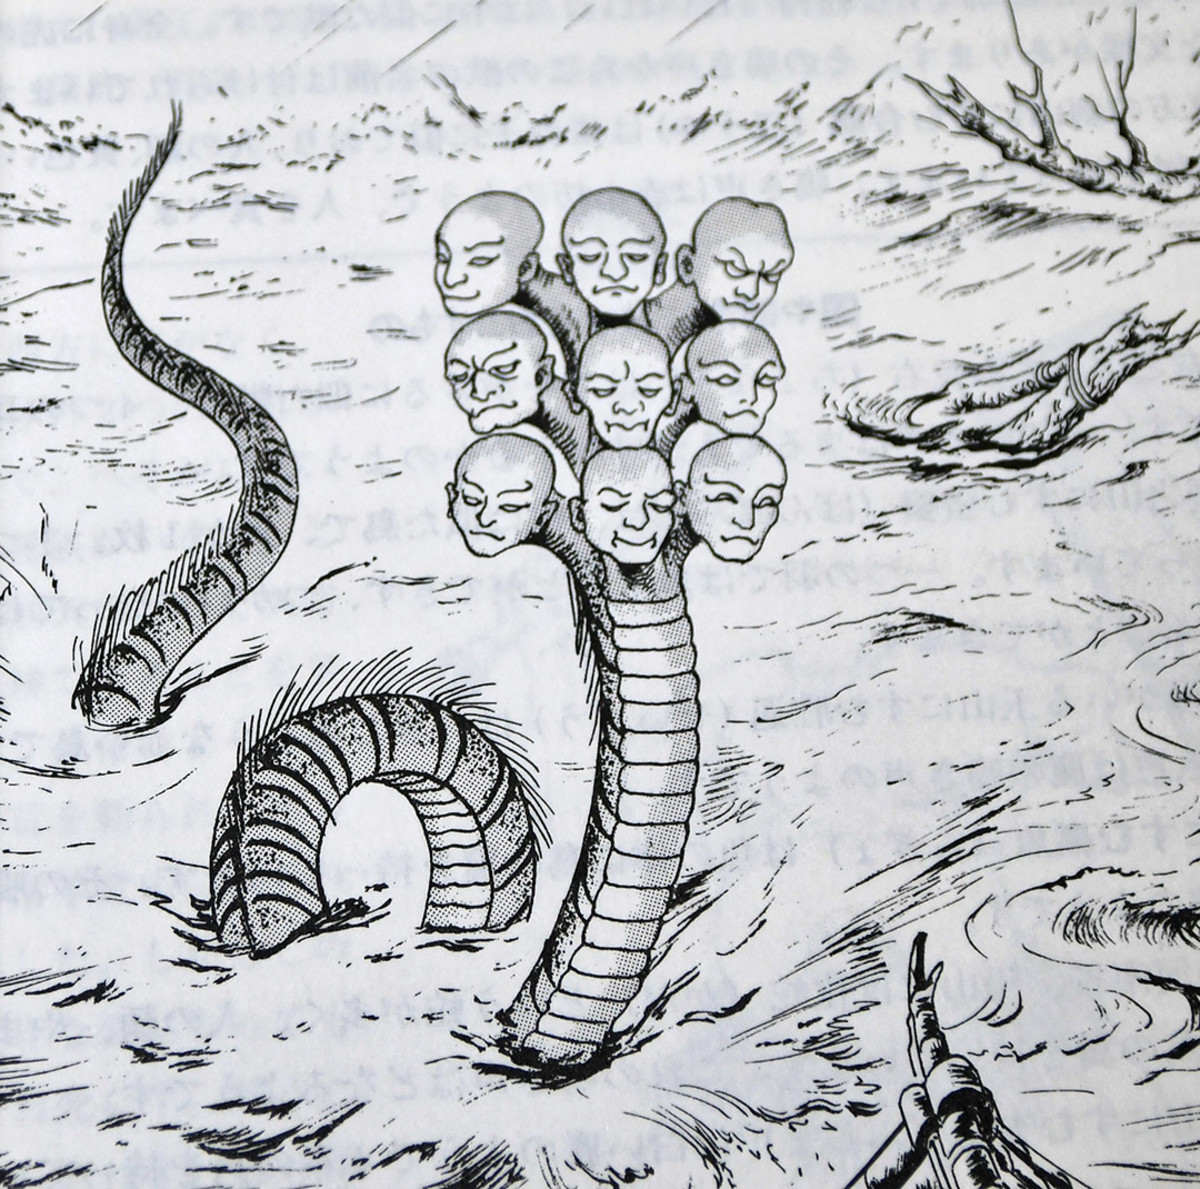 Artistic impression of Xiangliu in the Japanese RPG resource book series, Truth in Fantasy. In recent years, many paranormal Chinese creatures have appeared in video games too.